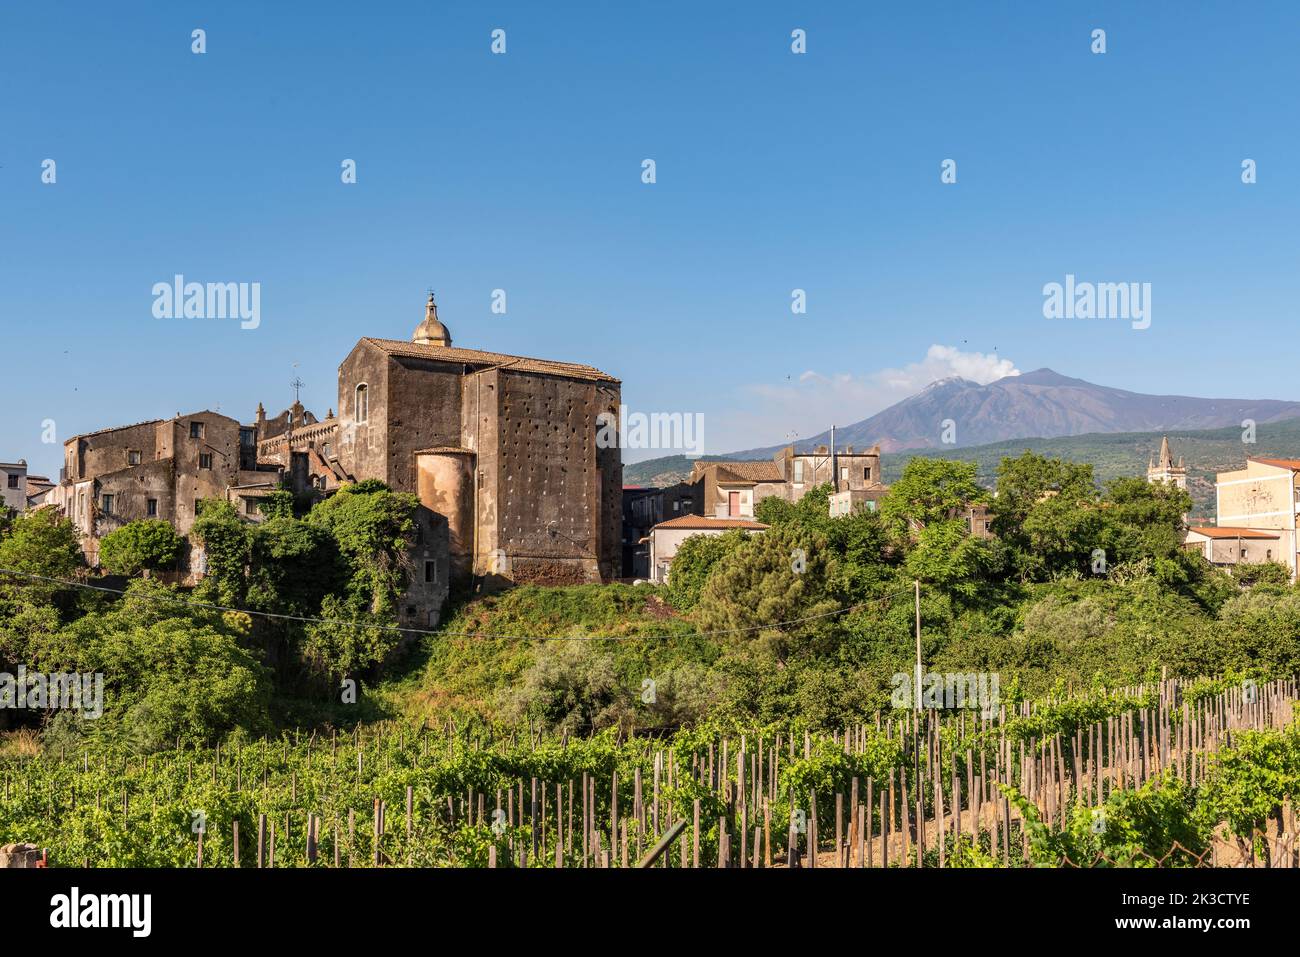 The small town of Linguaglossa perched high on the northern slopes of Mount Etna, Sicily, Italy Stock Photo